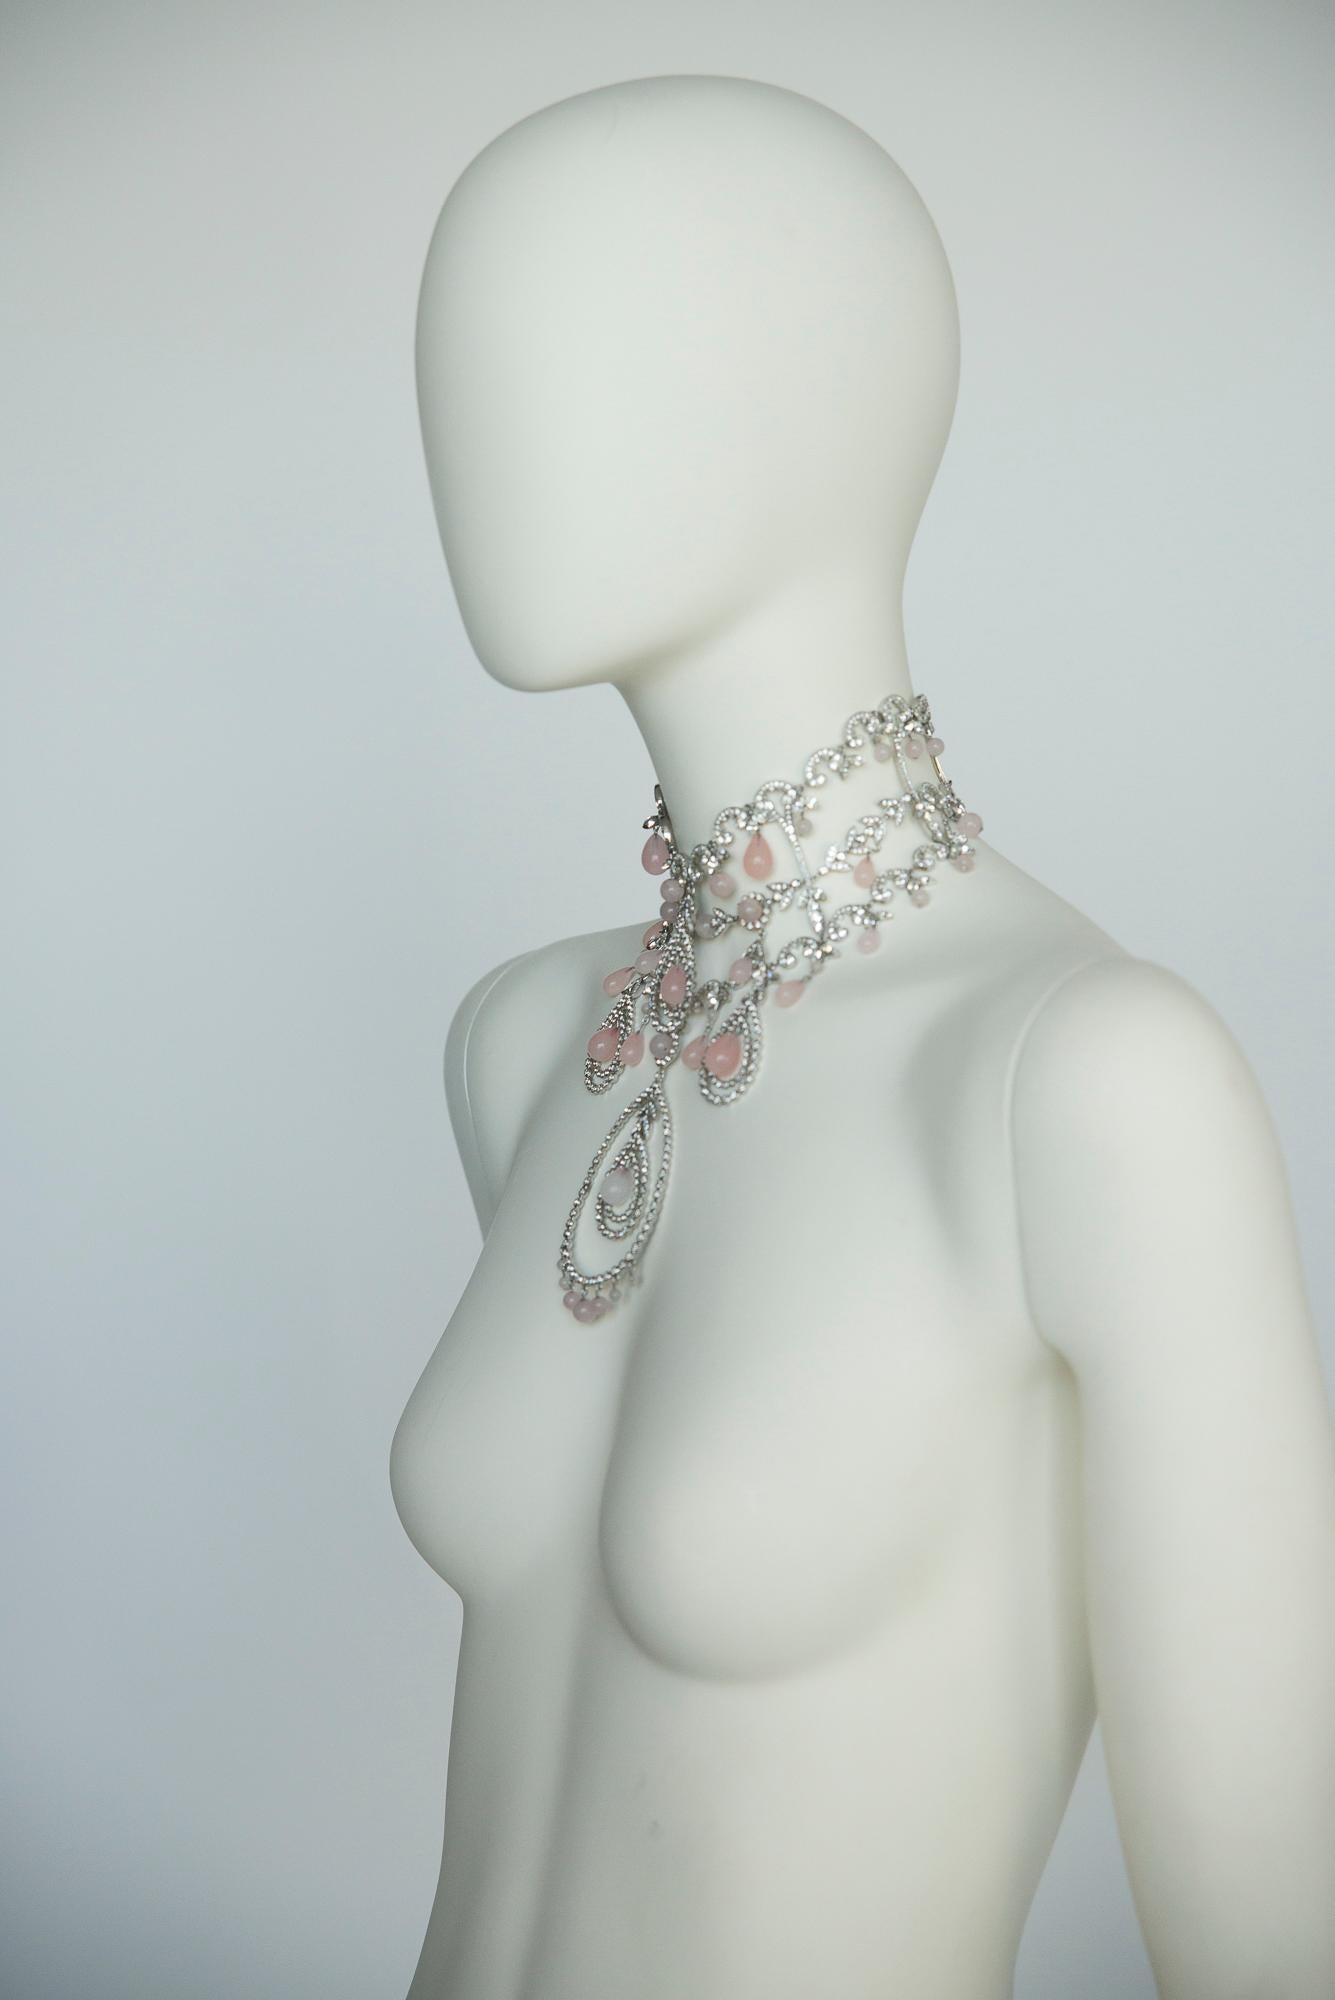 Christian Dior Couture Runway Crystal & Bead Choker Necklace, Fall-Winter 2003 4